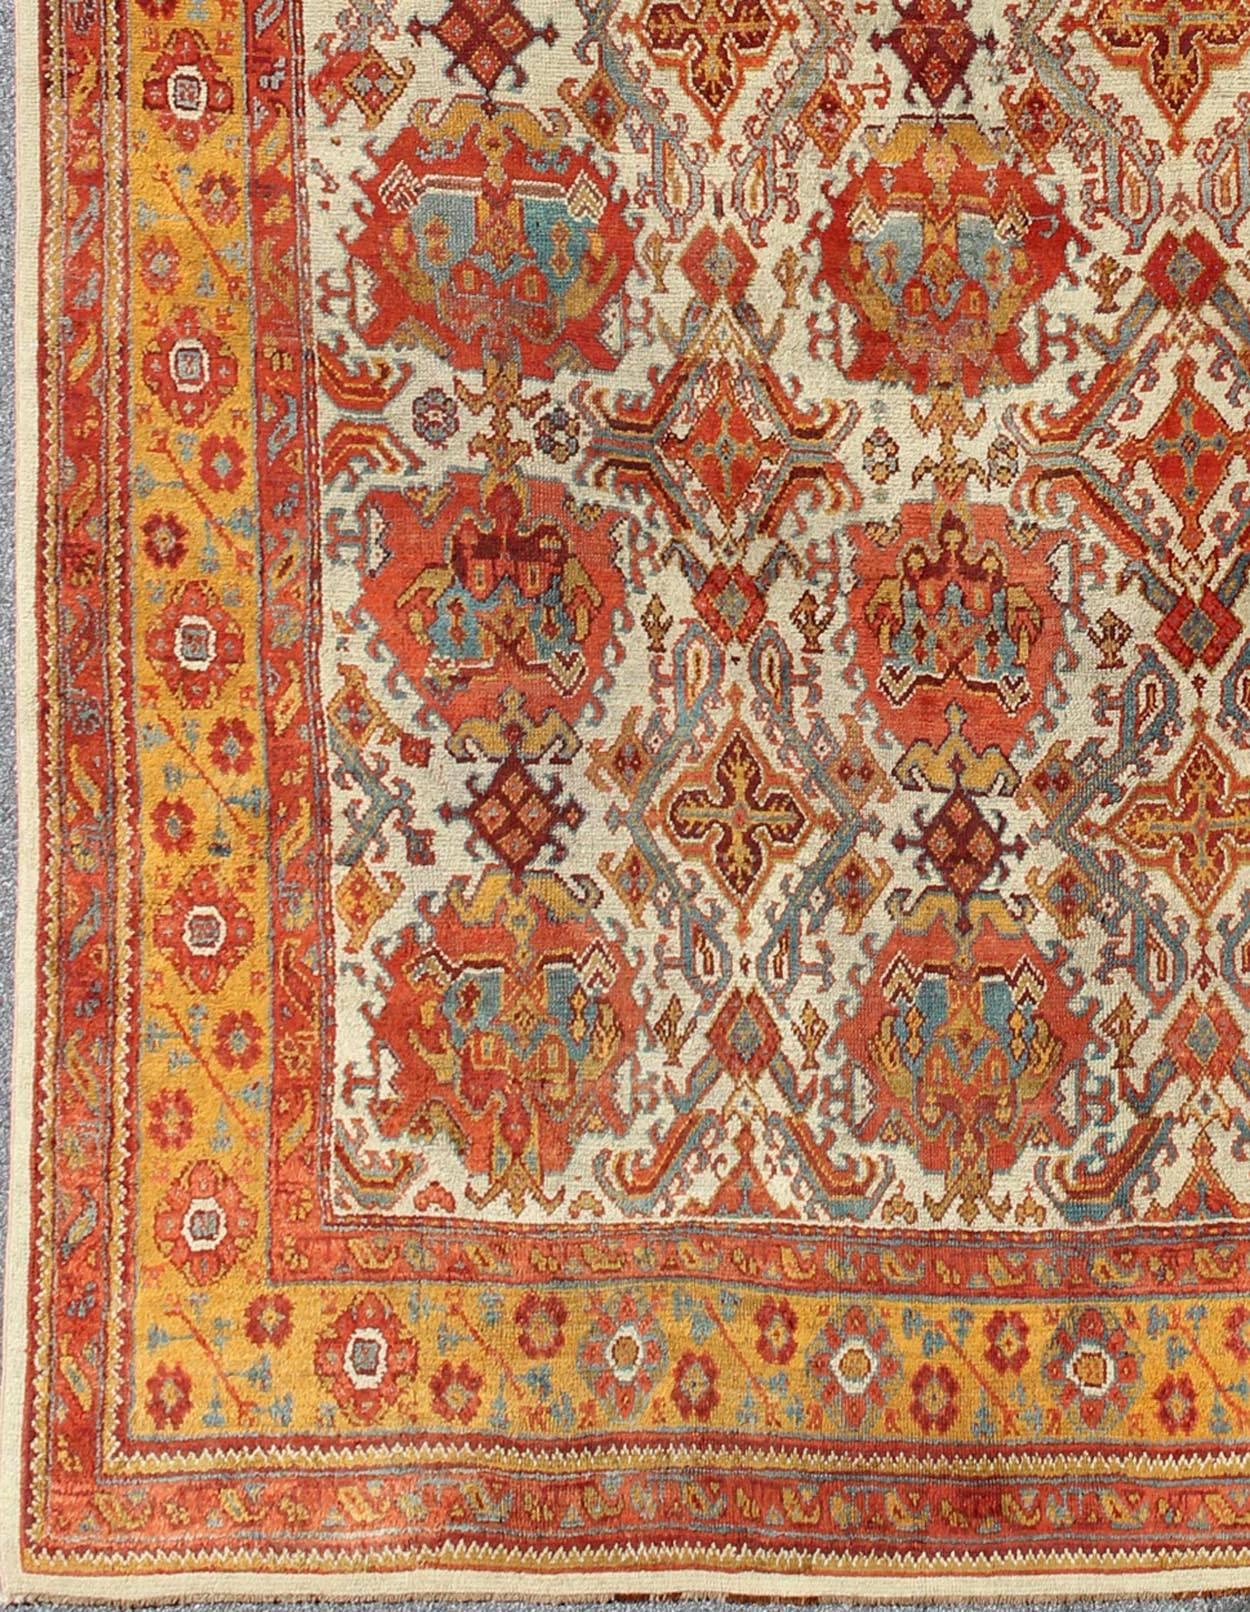 Antique Turkish Oushak Rug with Multi-Medallions in Ivory, Orange, Red & Blue  and gray,. Keivan Woven Arts / rug 17-0202, country of origin / type: Turkey / Oushak, circa 1900

Measures: 11'10 x 17'8.  

This antique Turkish Oushak rug features an